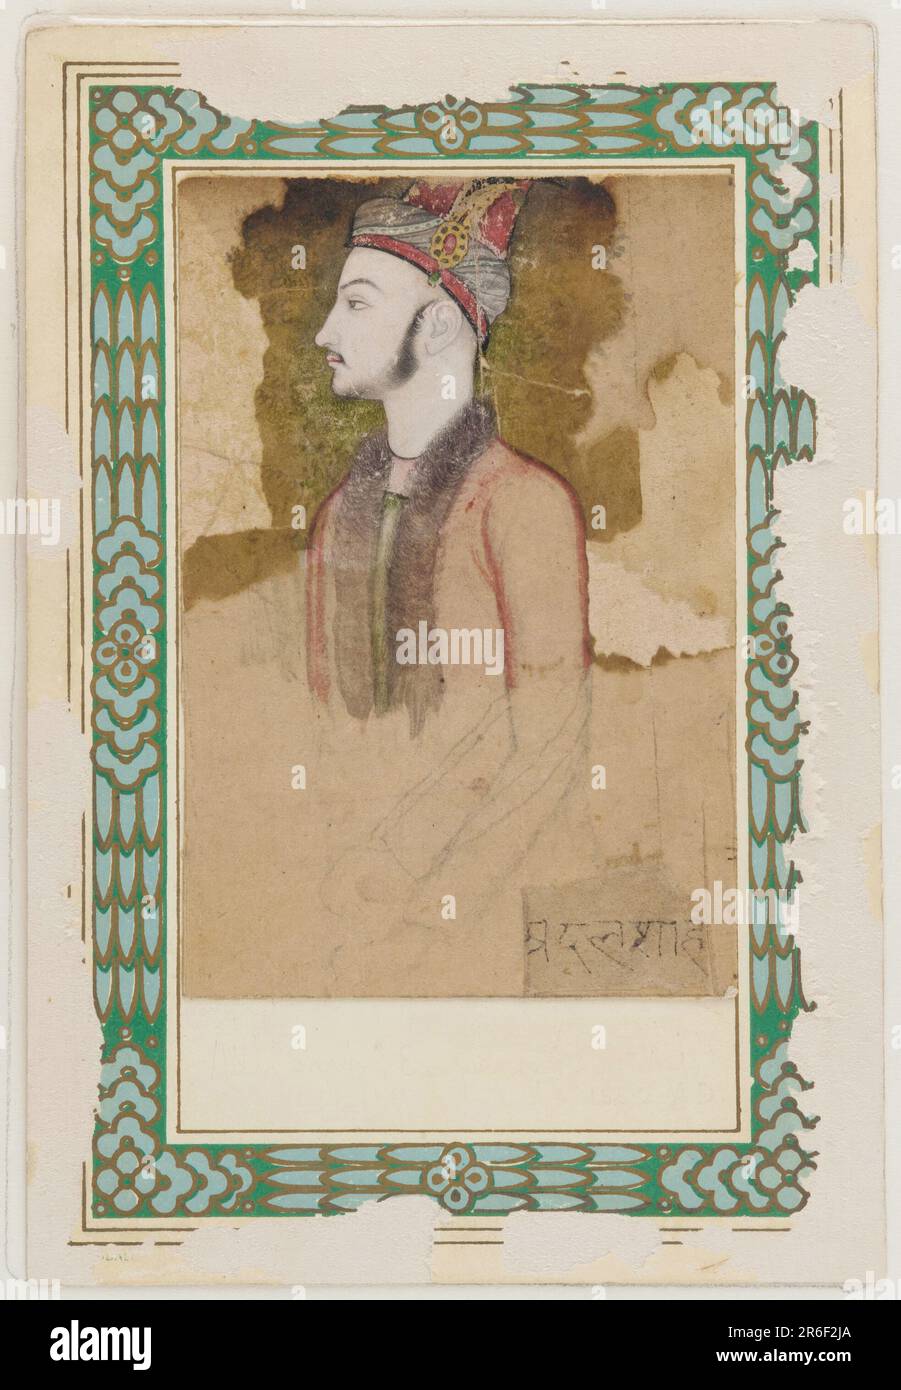 Portrait of Ibrahim Adil Shah II, of Bijapur (d.1626) (?). Date: ca. 1640. Period: Adil Shahi dynasty. Color and gold on paper. Origin: Bijapur, Karnataka state, Deccan plateau, India. Museum: Freer Gallery of Art and Arthur M. Sackler Gallery. Stock Photo